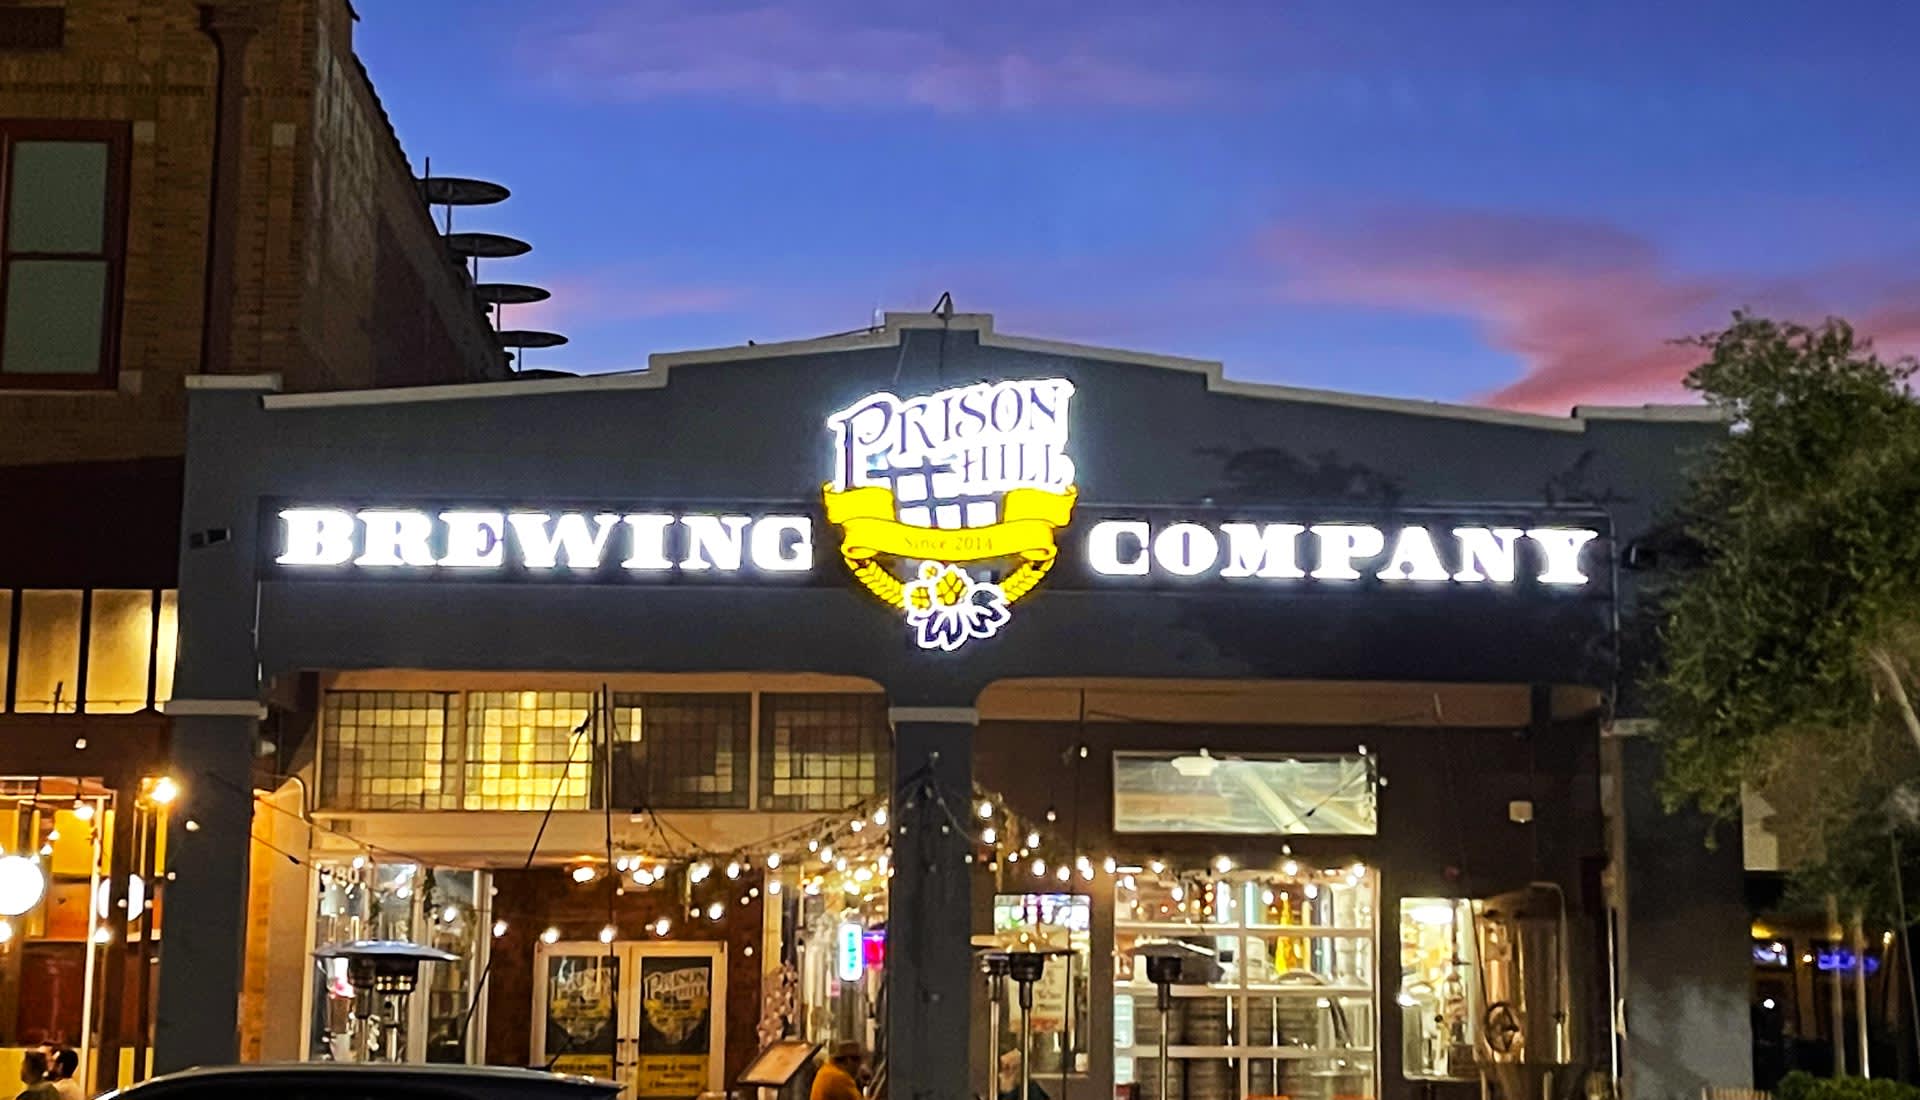 The front of Prison Hill Brewery